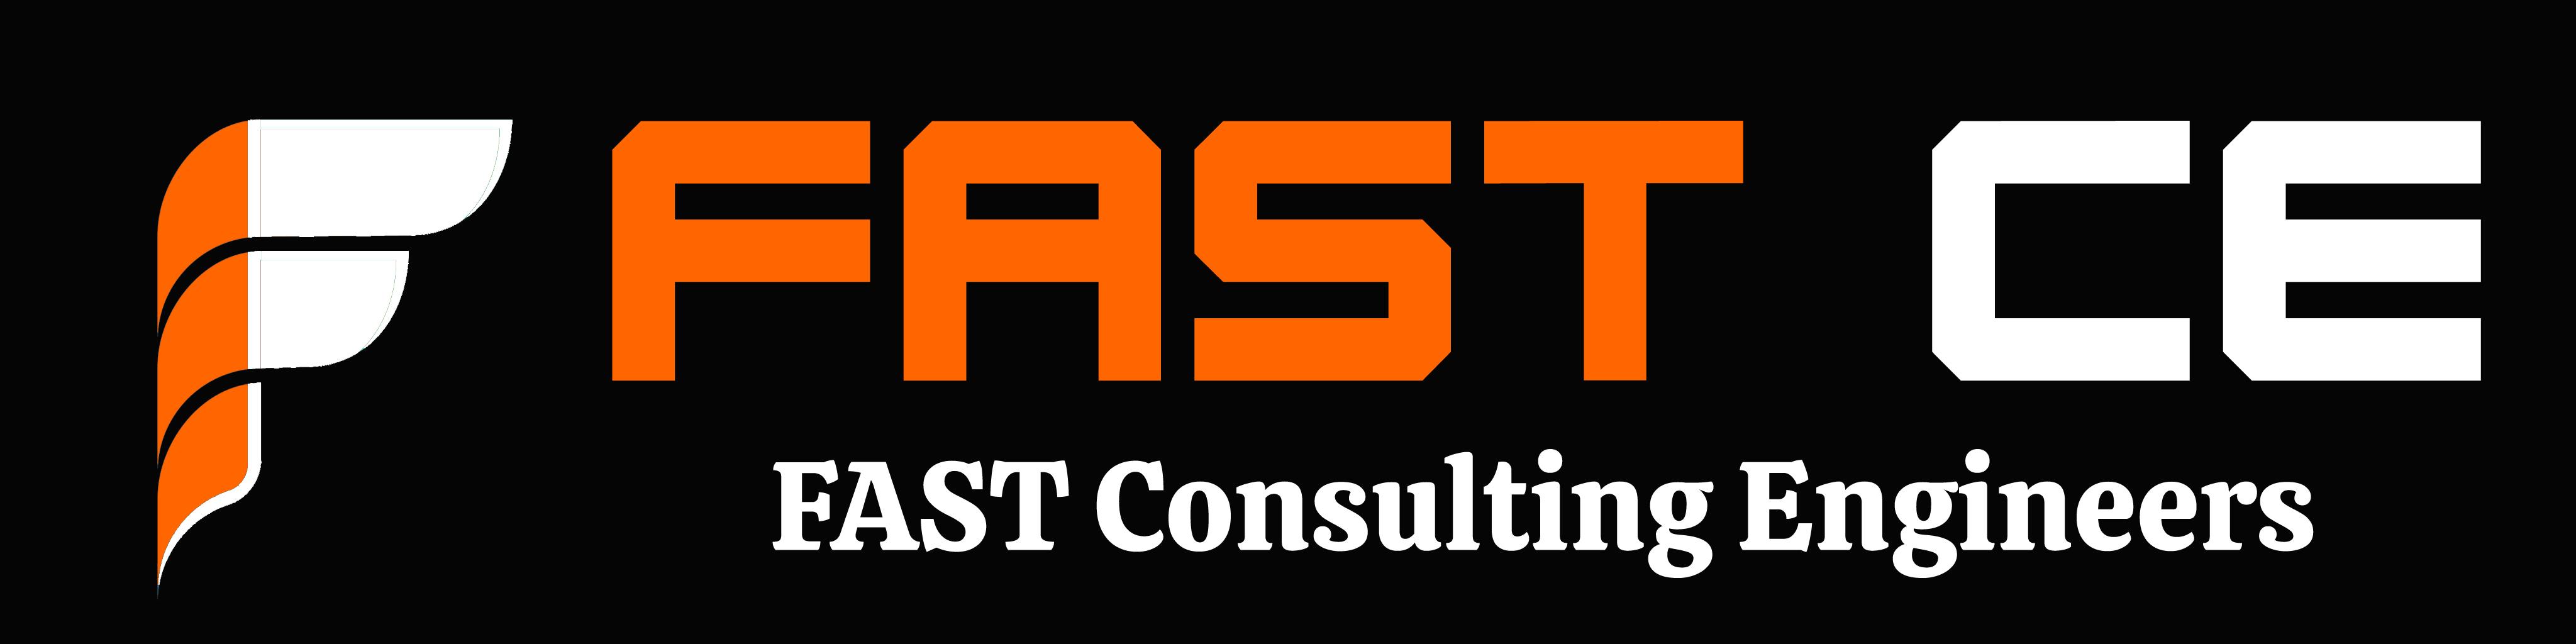 FAST Consulting Engineers